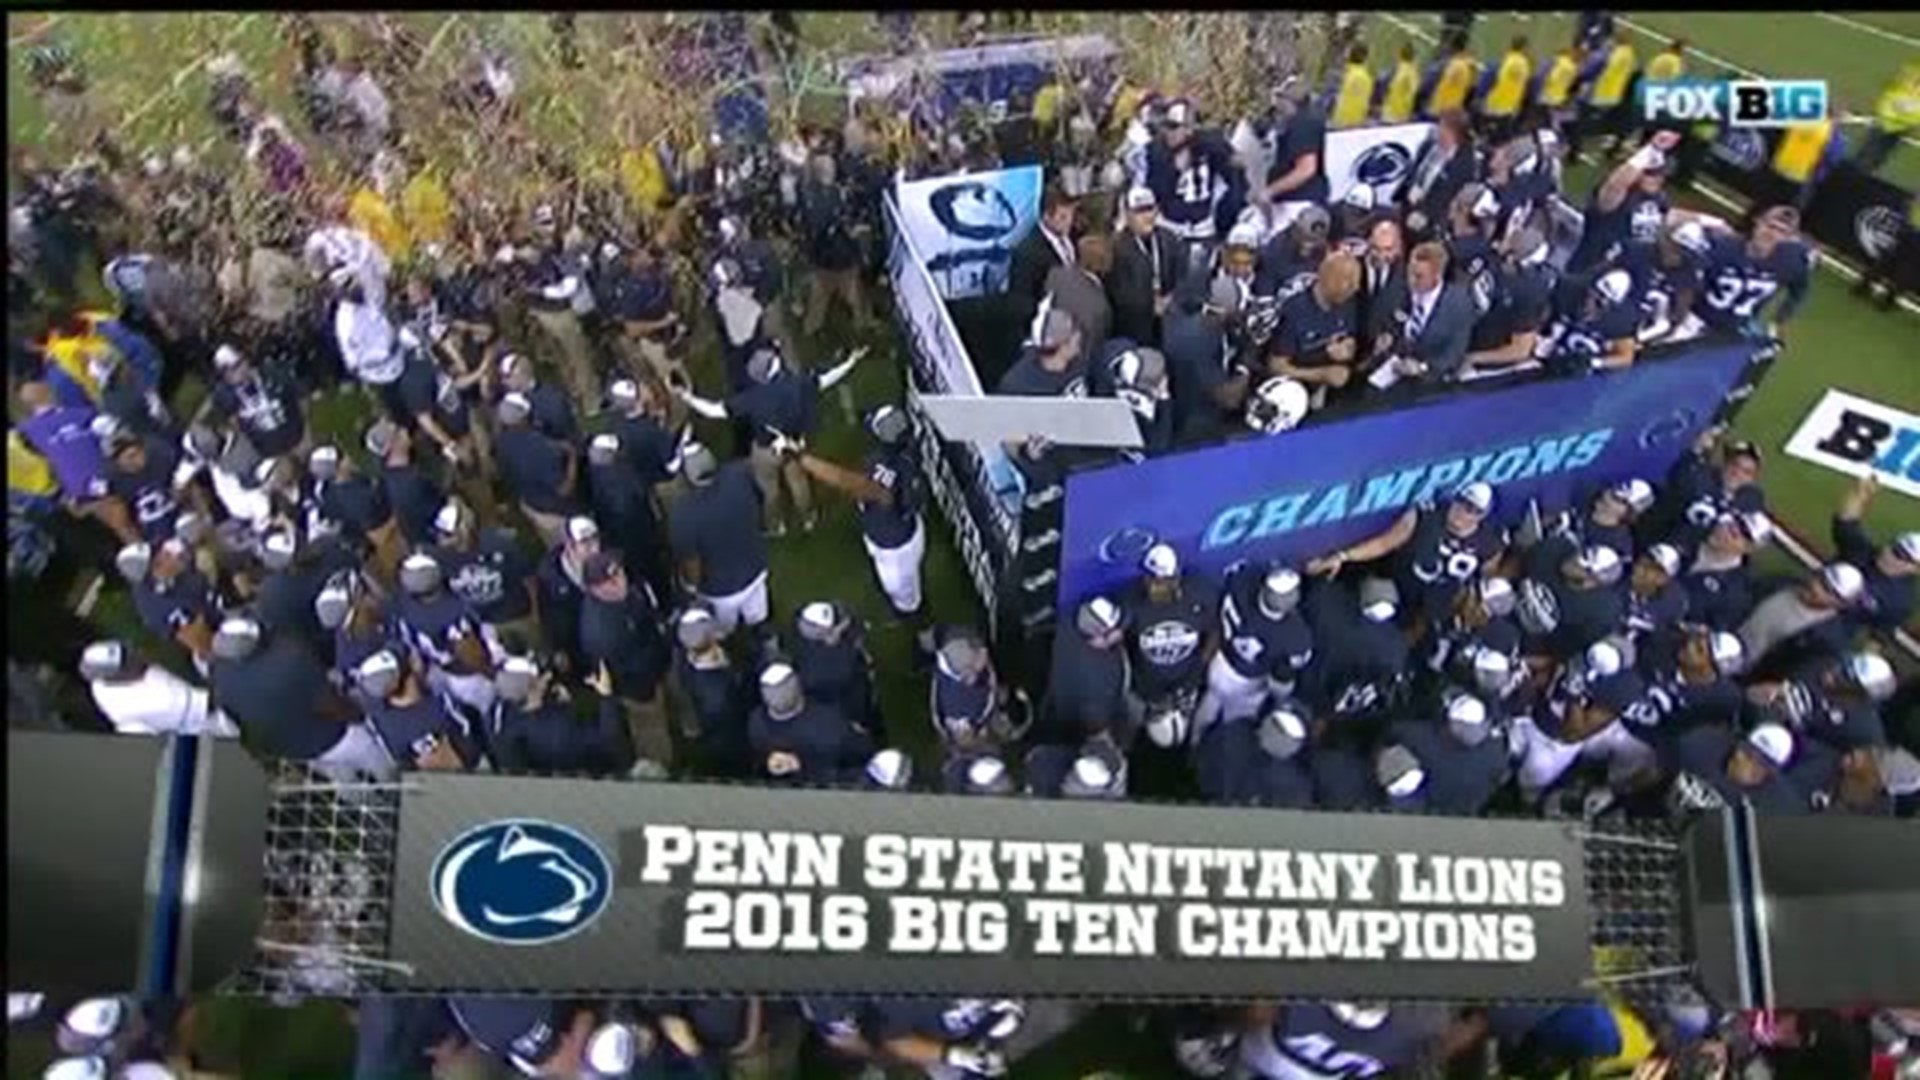 Penn State Fans Headed To The Rose Bowl